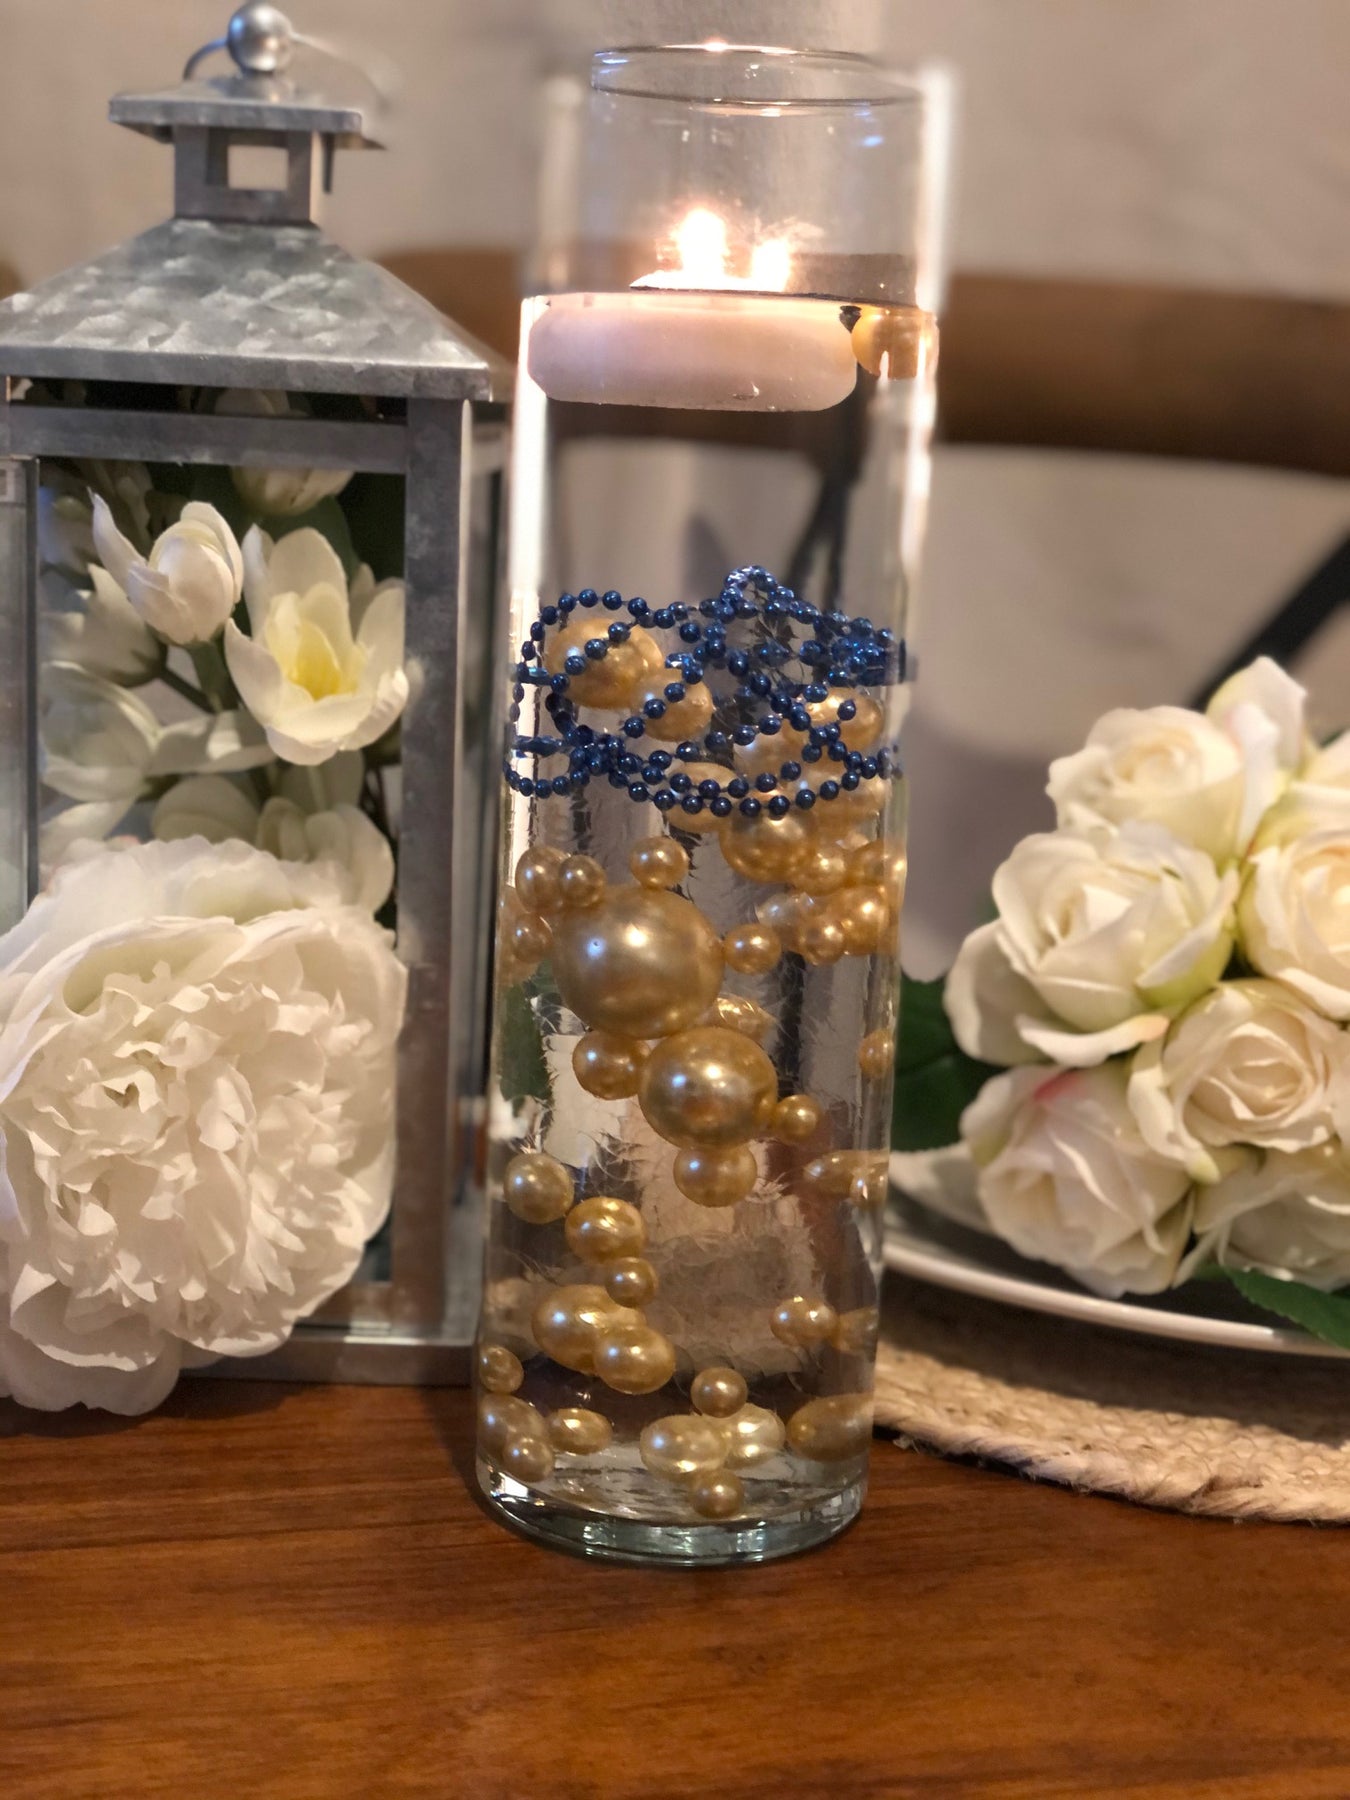 A DIY Candle and Pearl Centerpiece: So Simple, So Glamorous